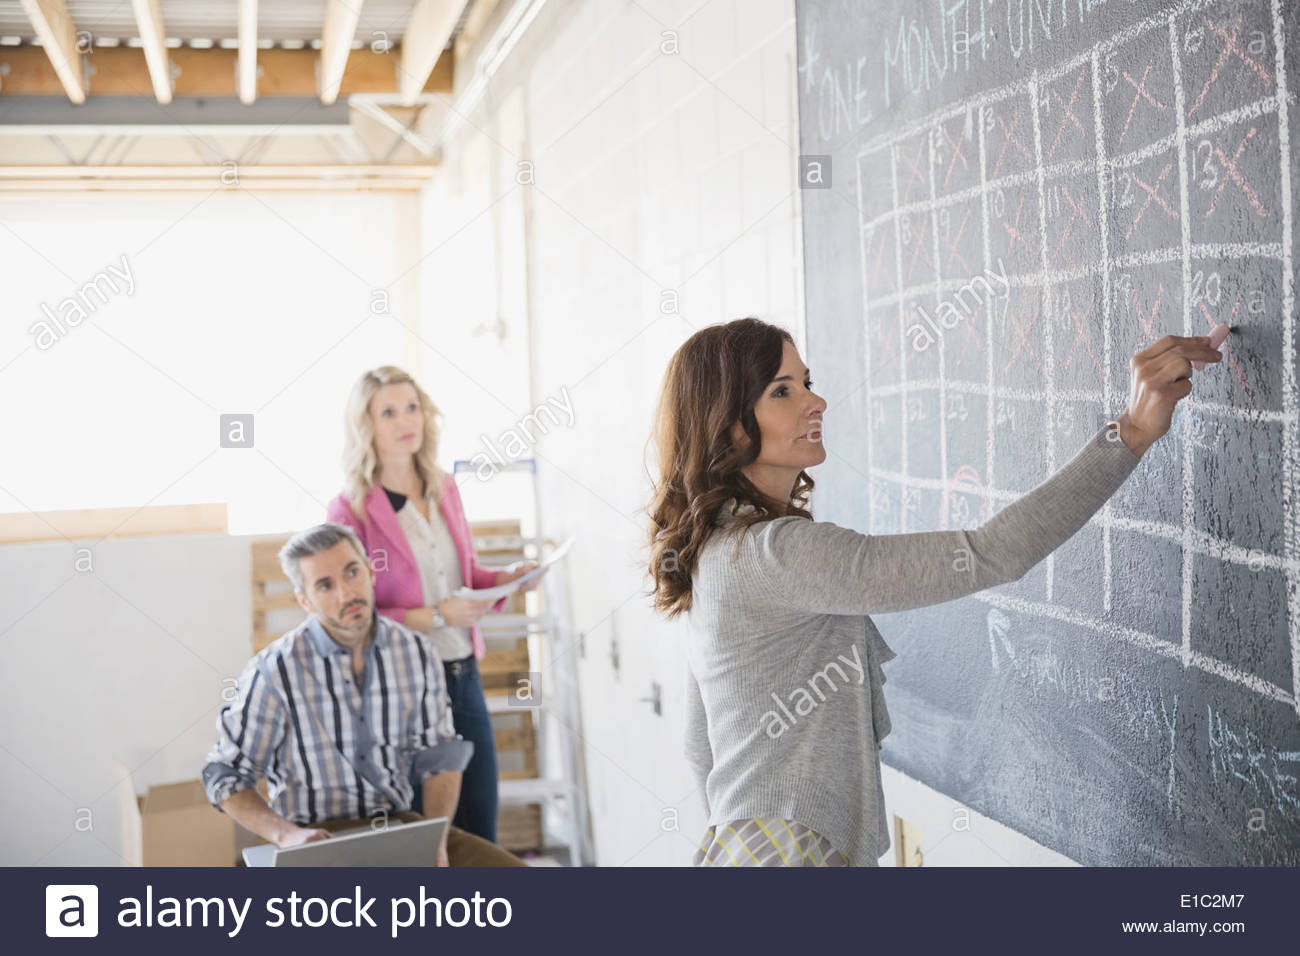 Business owners at chalkboard calendar in new office Stock Photo